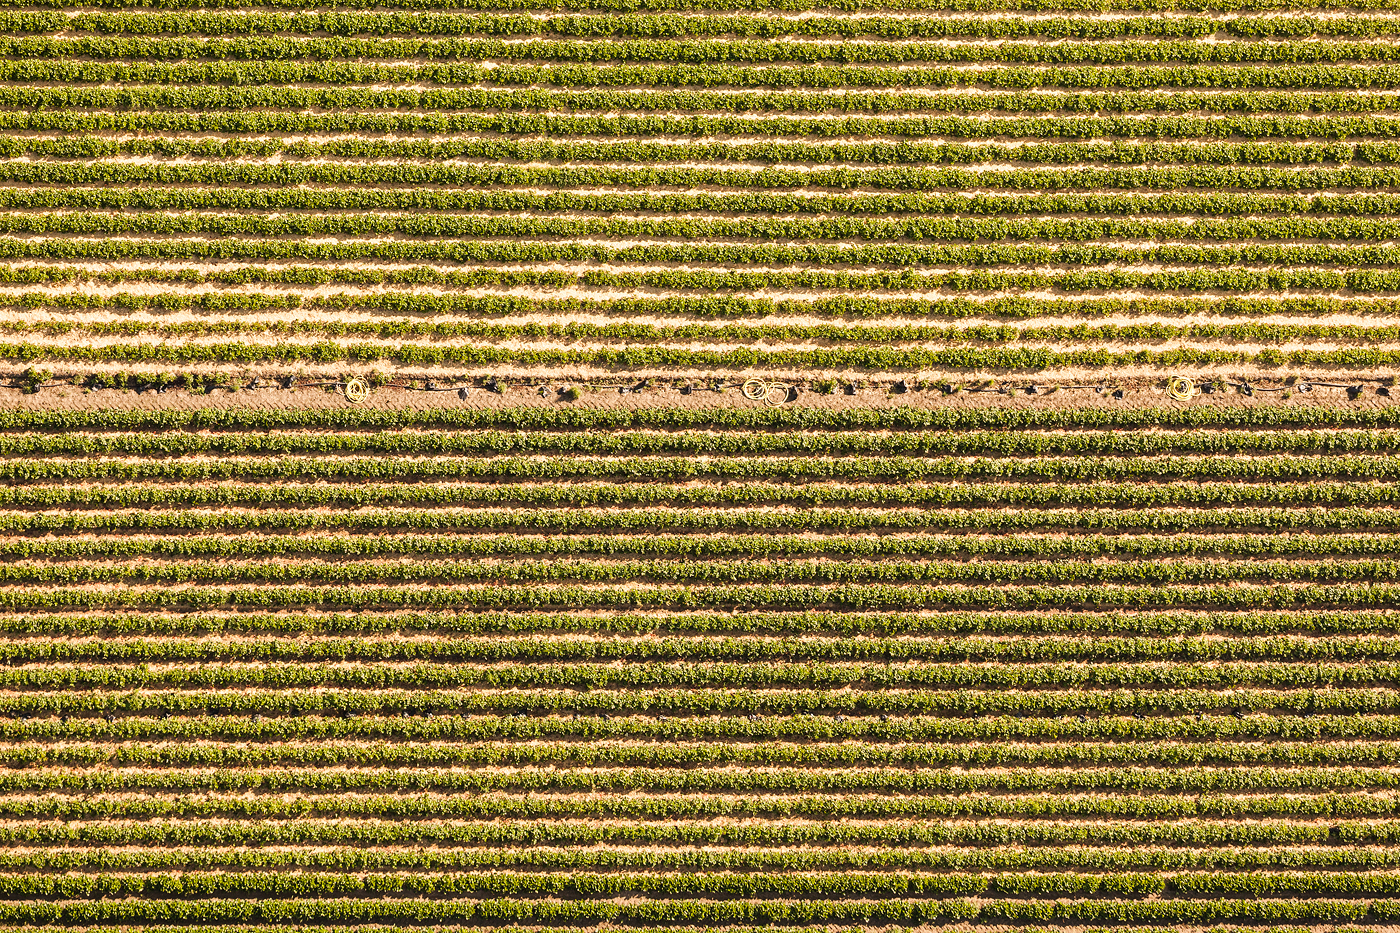 abstract Aerial Landscape Nature graphical Agricultural structure pattern above summer sunlight fields agriculture farming industrial